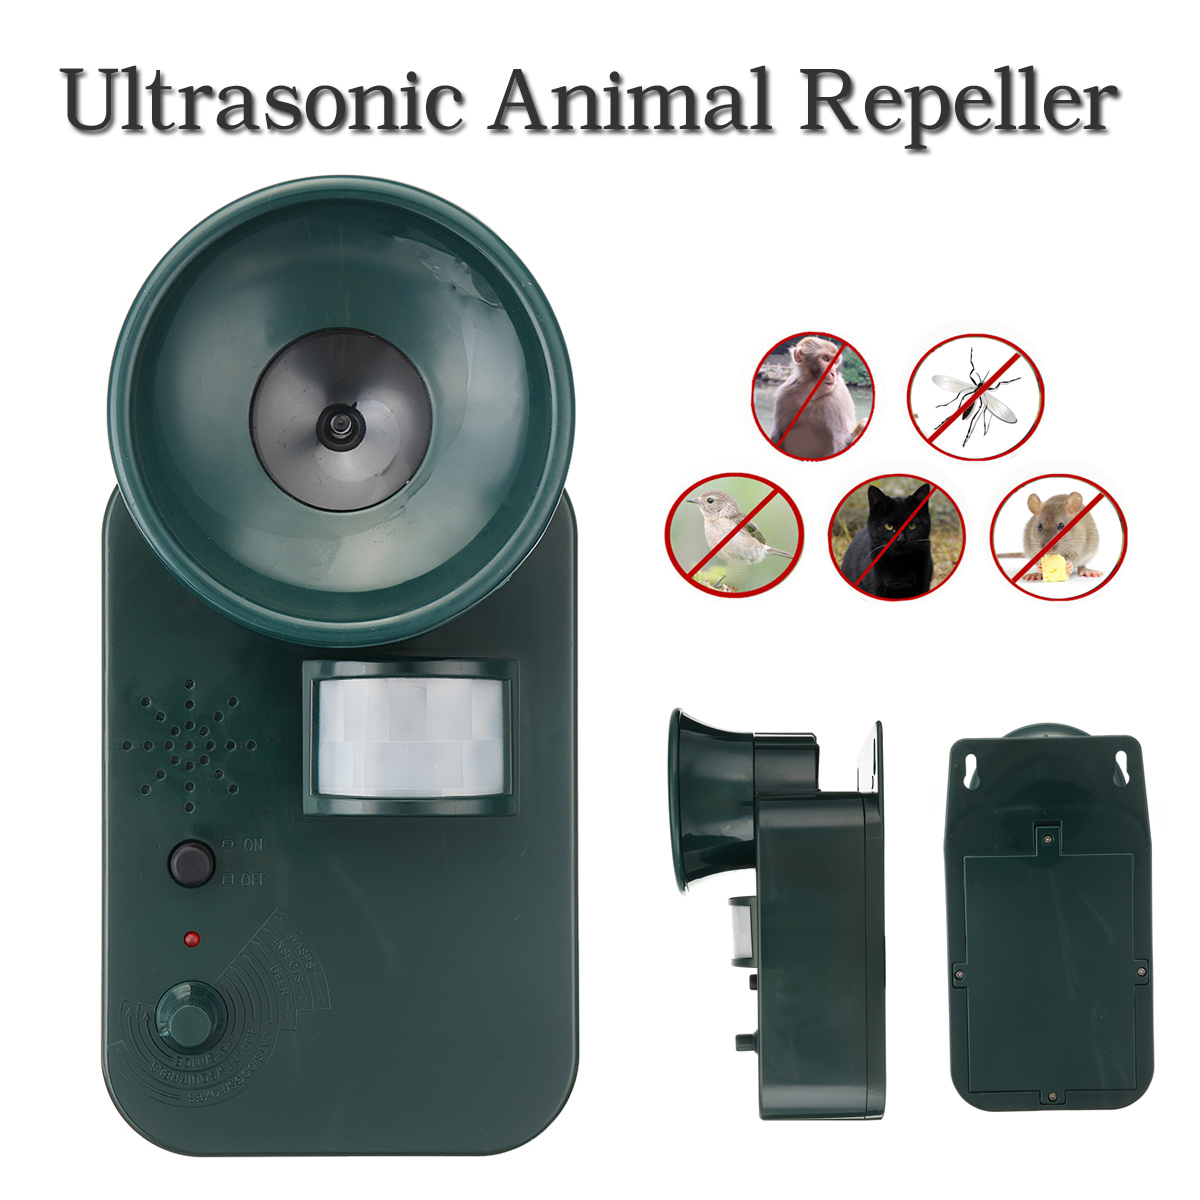 5000sqft-9V-DC-Ultra-sonic-Cordless-Pest-Animal-Repeller-Outdoor-Safely-Repel-Various-Animal-1304035-2